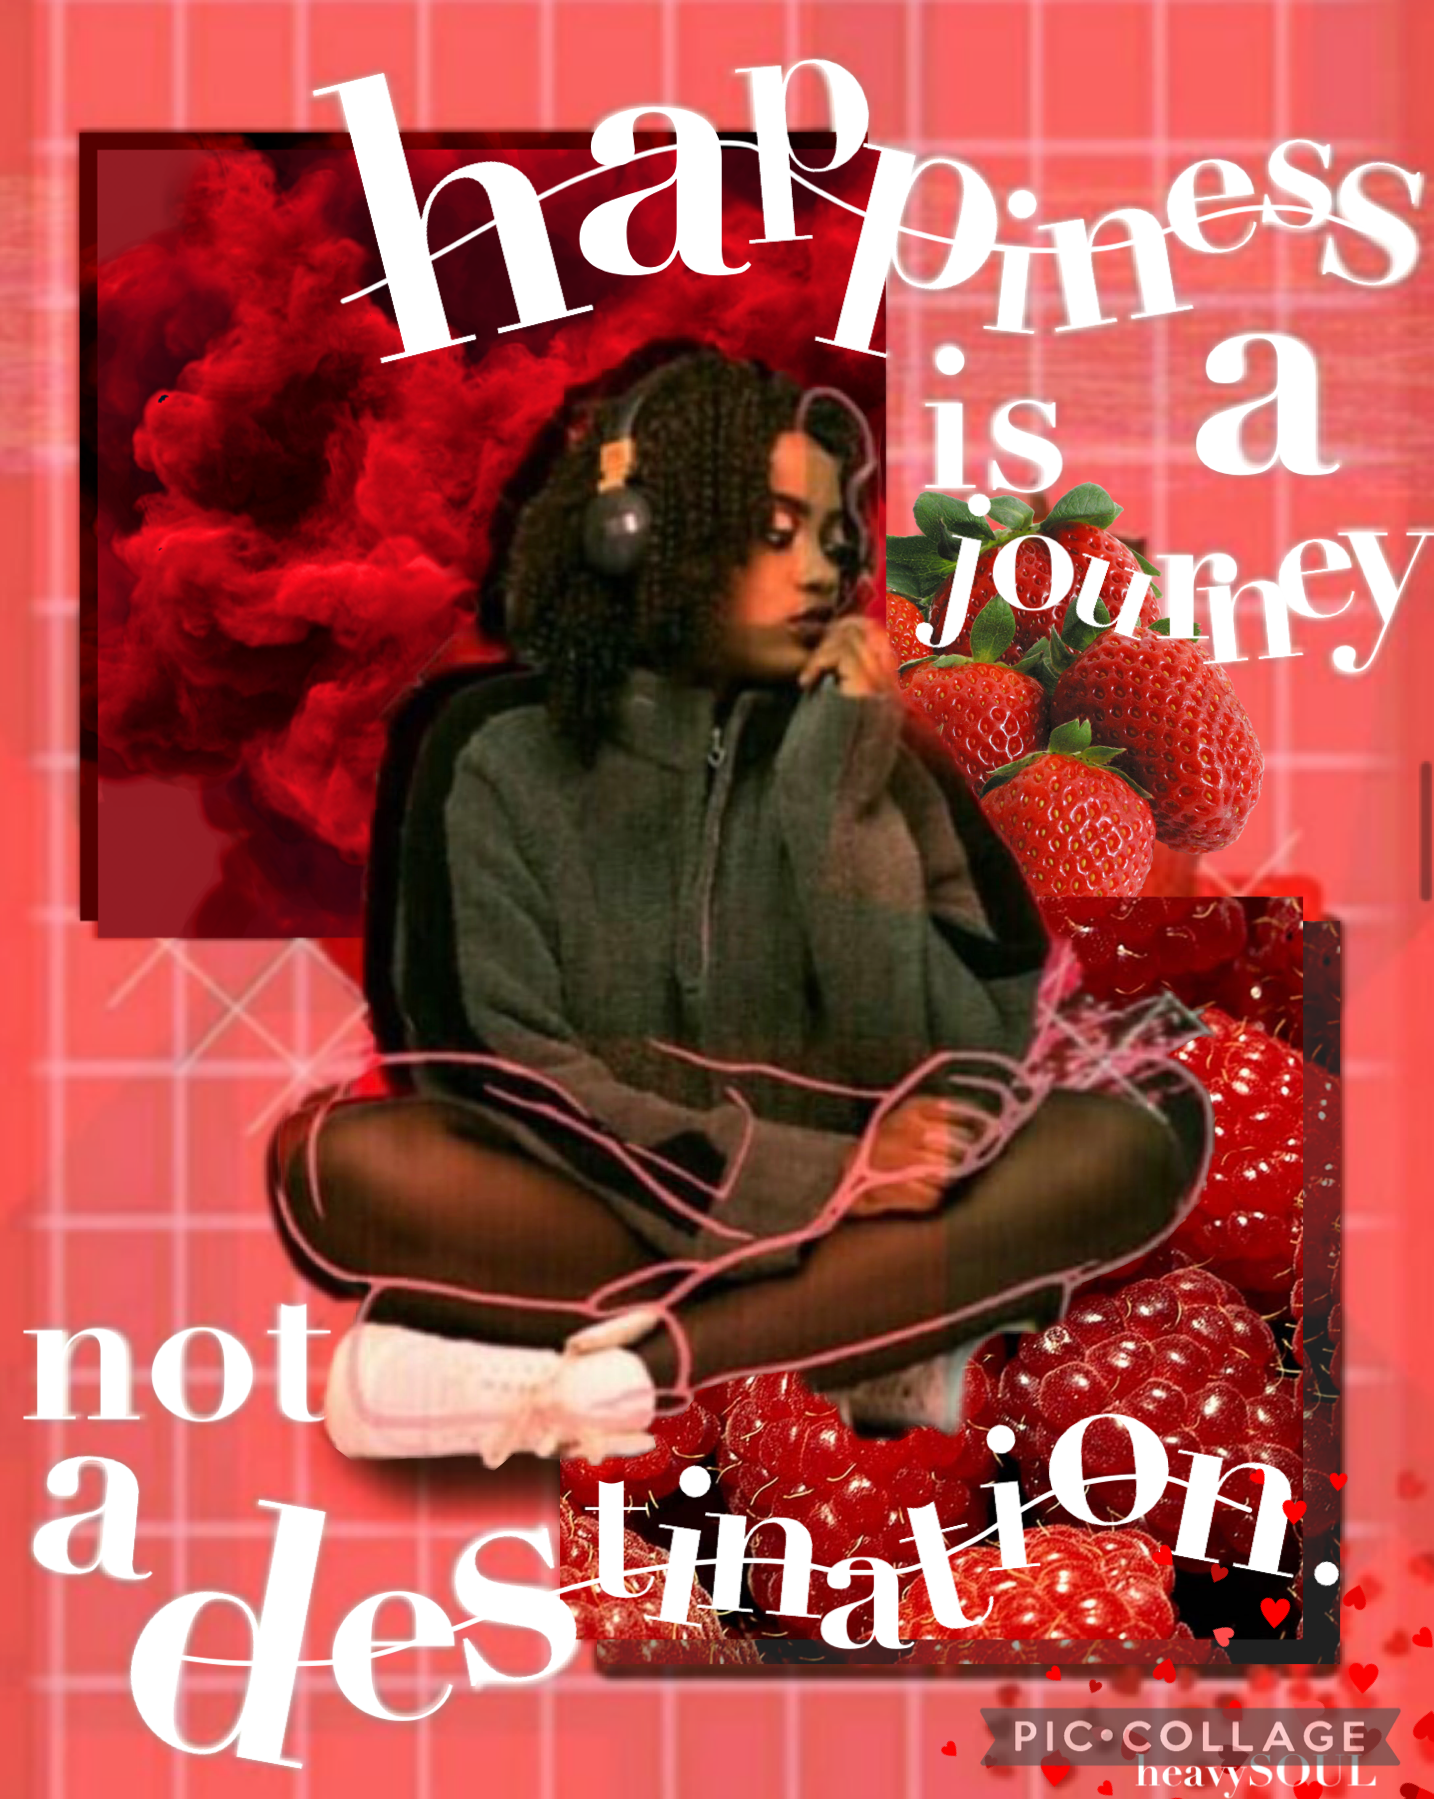 “Happiness is a journey not a destination.”